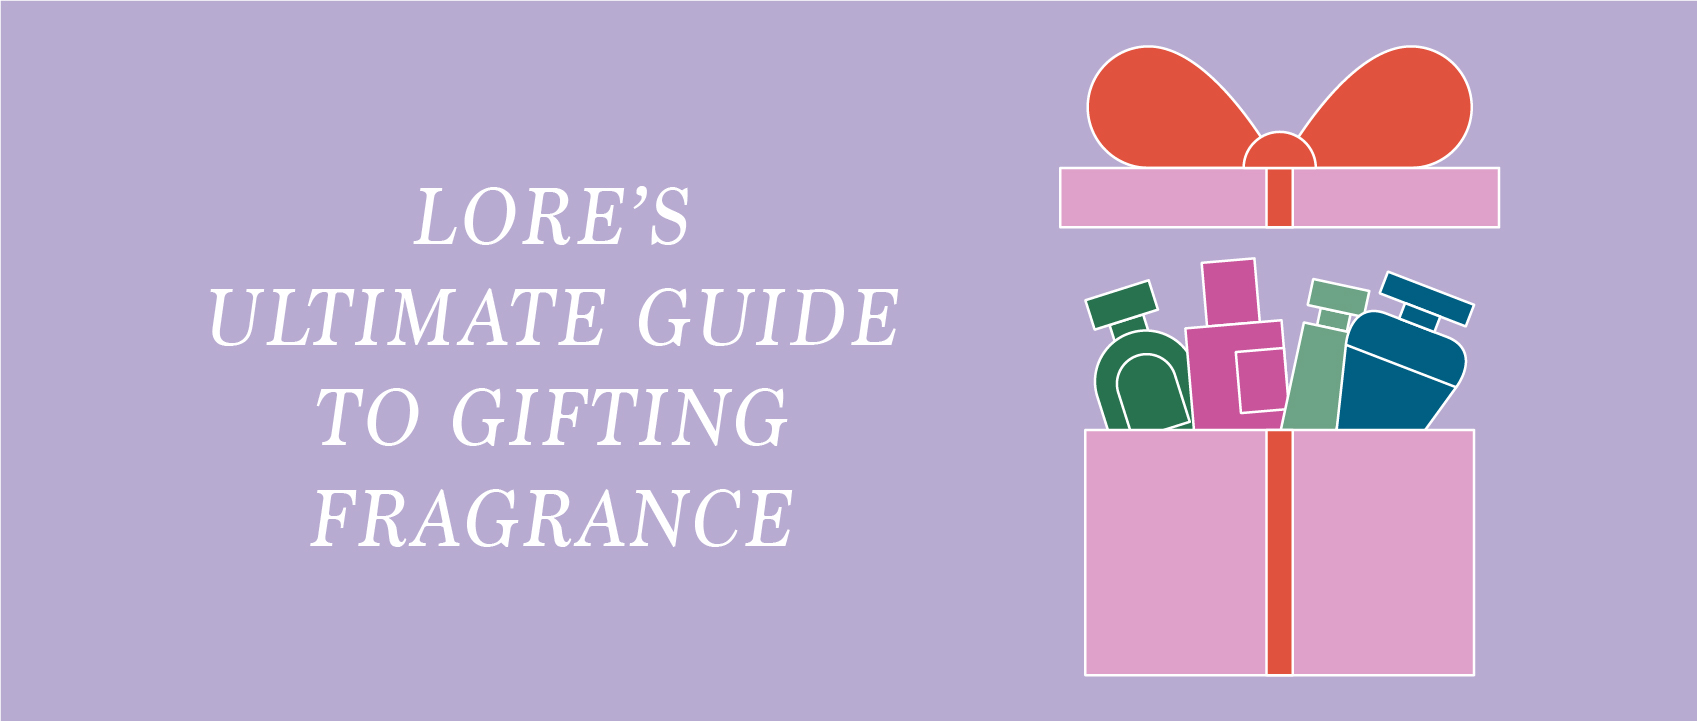 illustration of perfume coming out of a gift box lore's ultimate guide to gifting fragrance